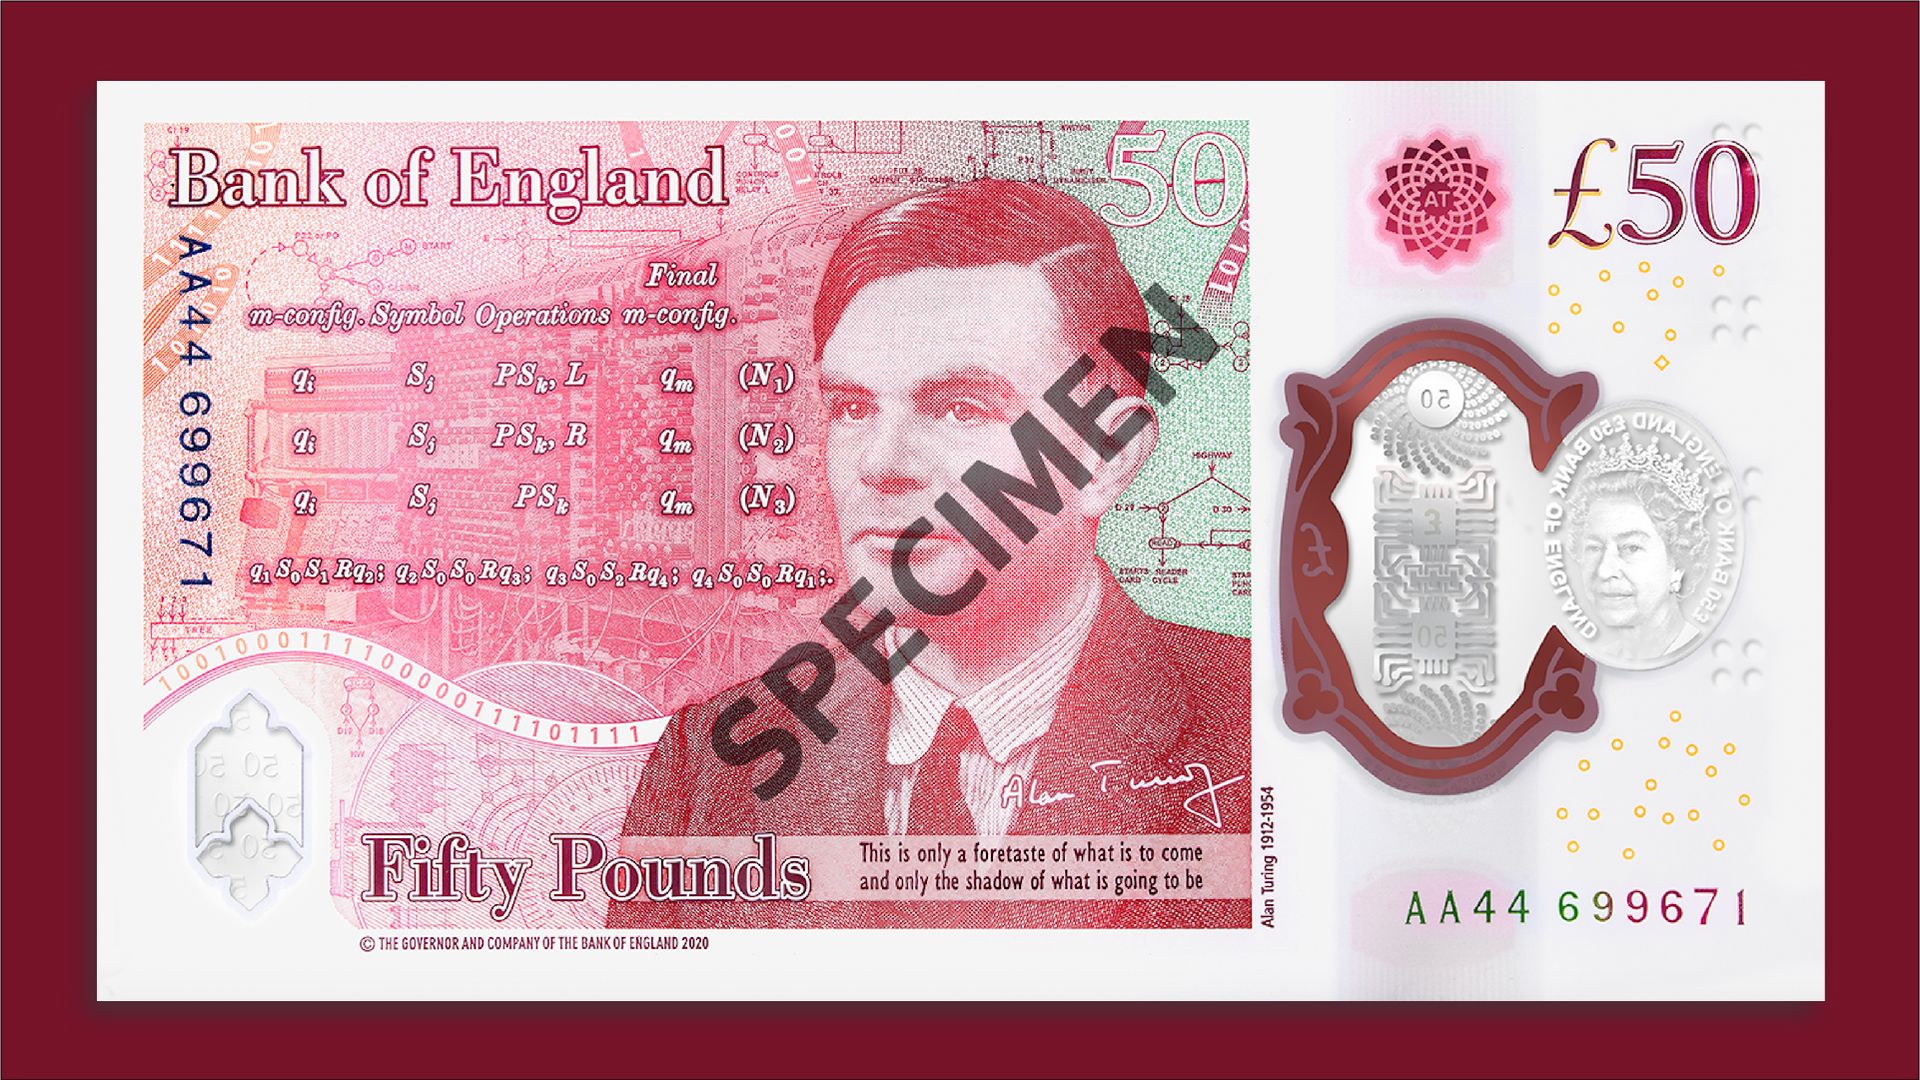 Alan Turing on the £50 note